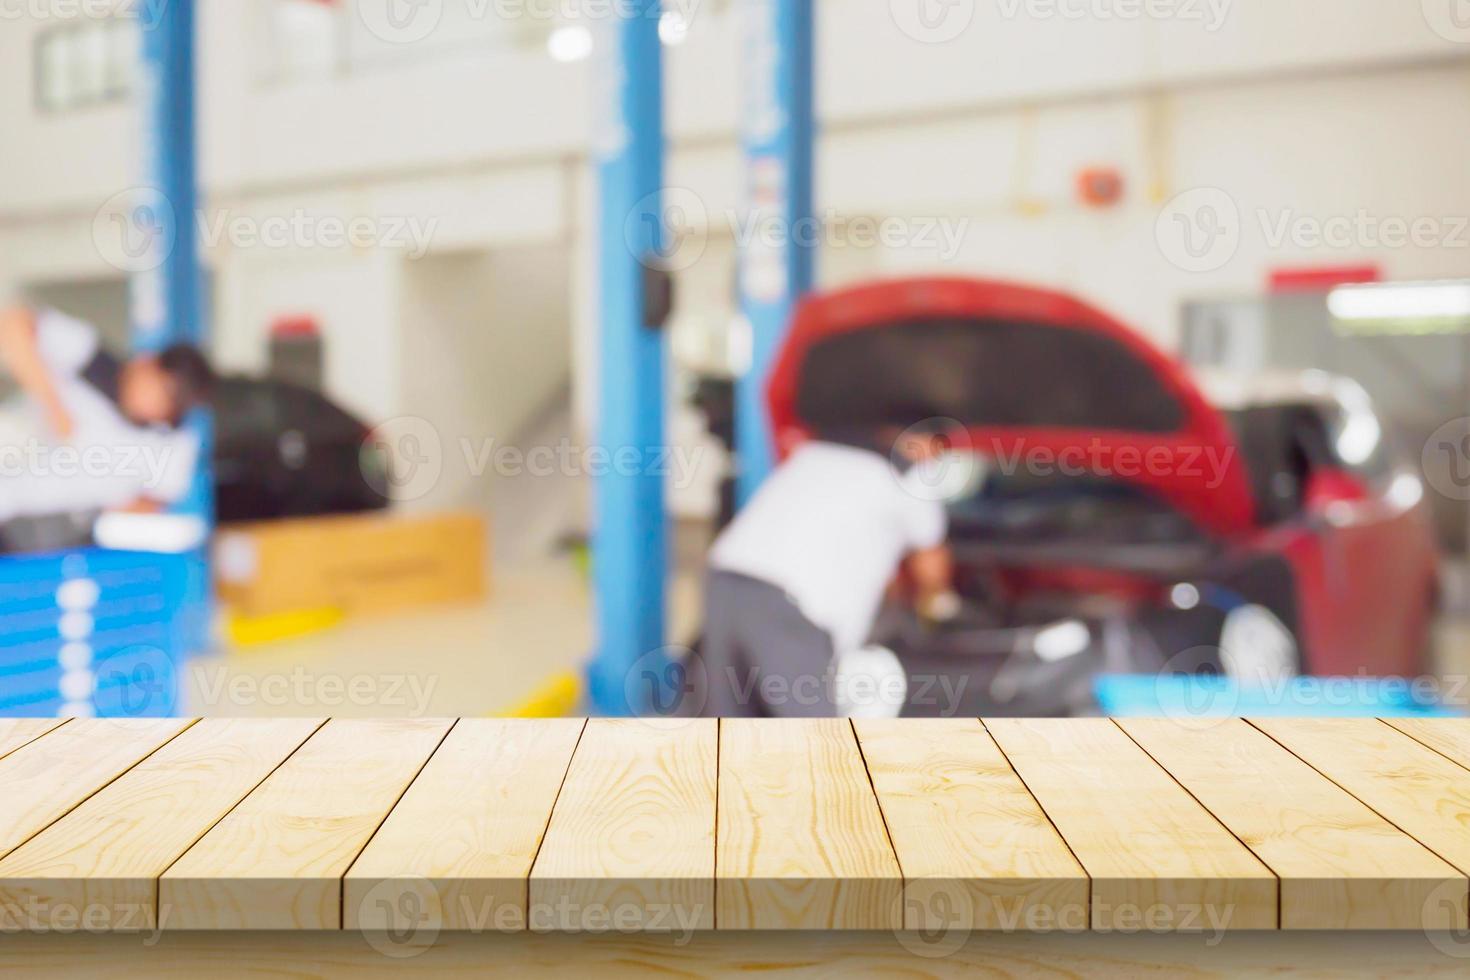 Empty wood table top with car service centre auto repair workshop blurred background photo